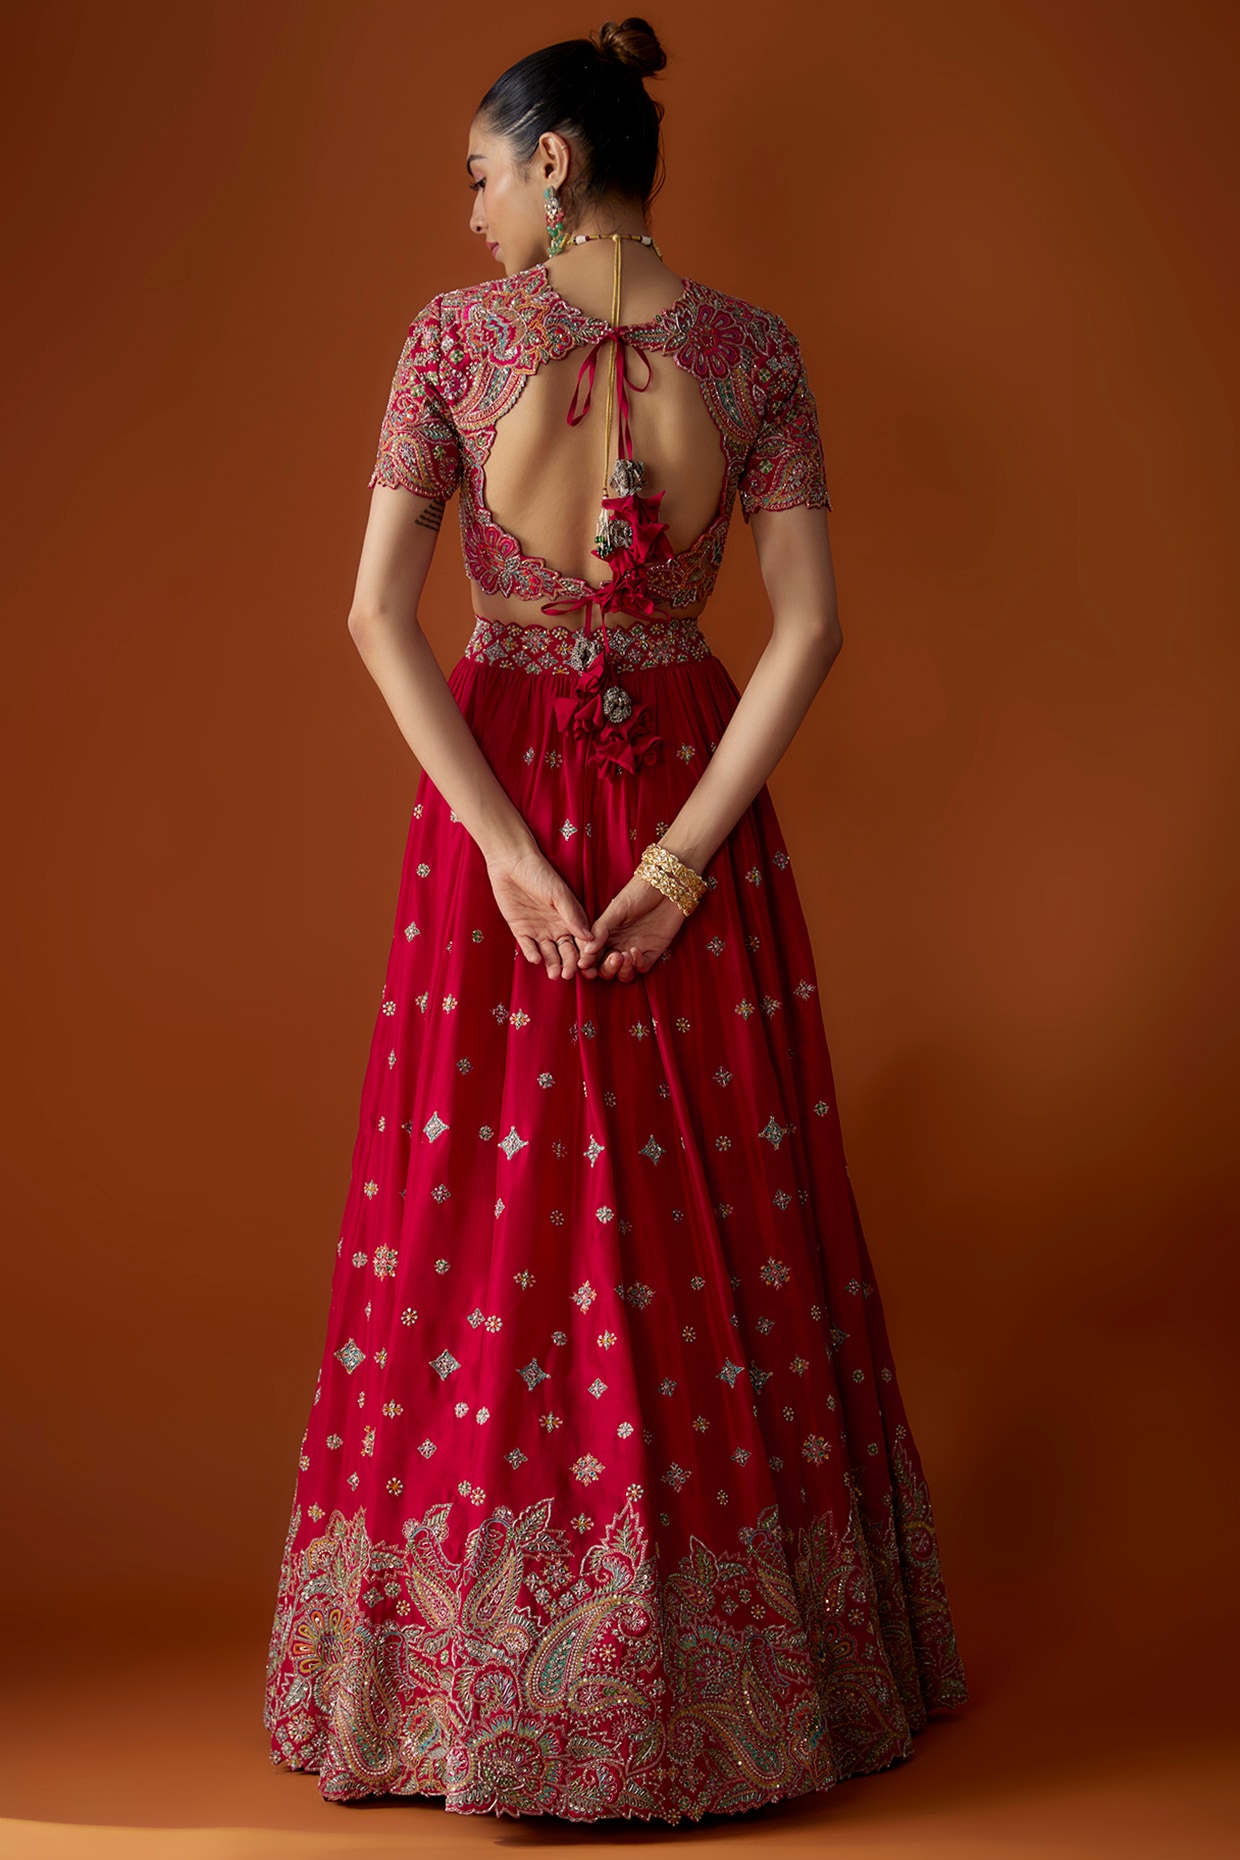 Exclusive Salwars by Mrunalini Rao | Dress designs for stitching, Indian  party wear, Indian dresses